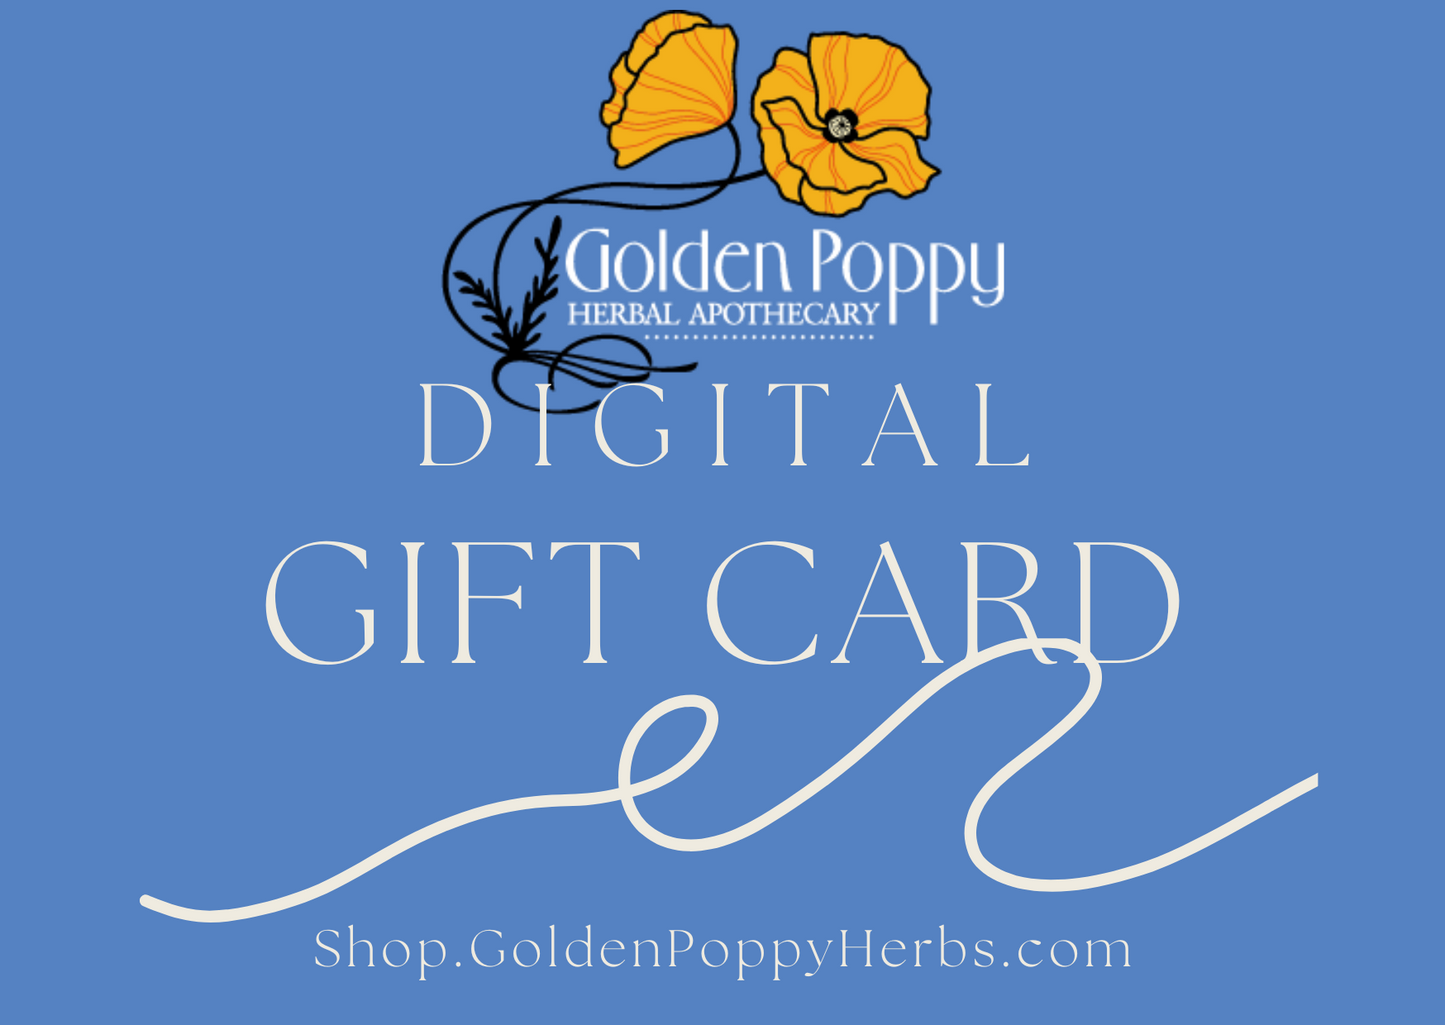 Golden Poppy Herbal Apothecary DIGITAL Gift Card